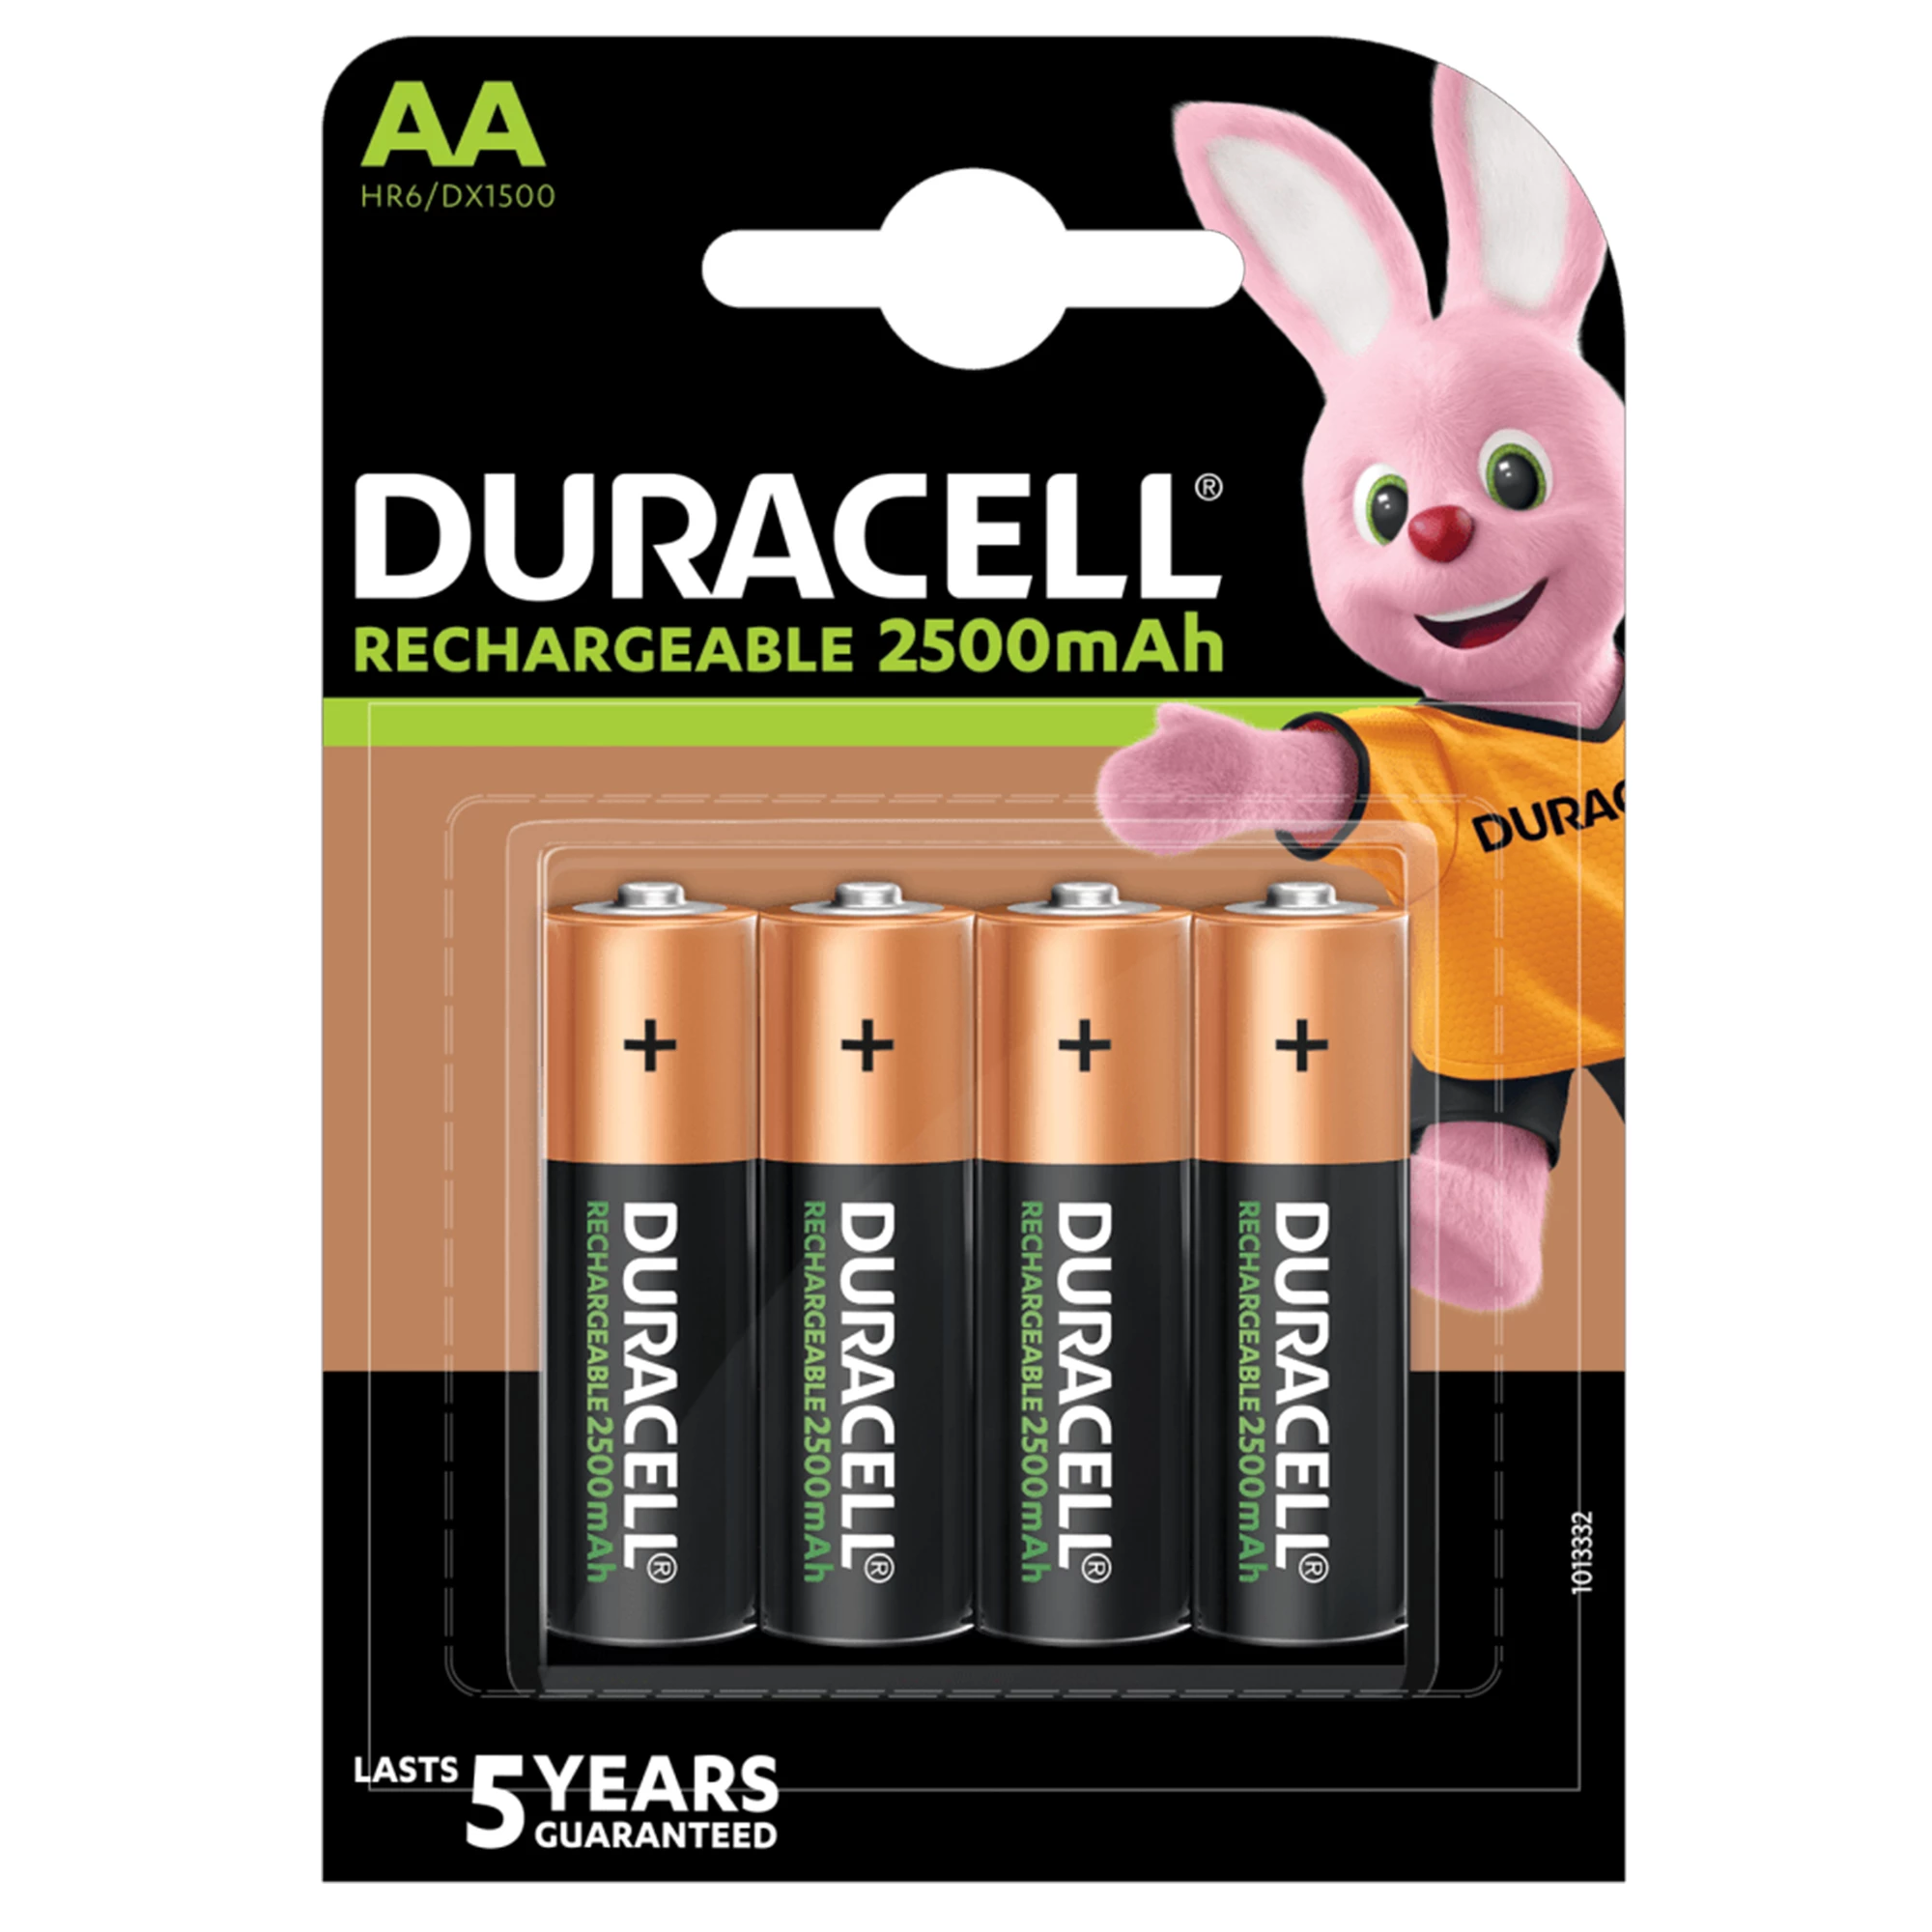 Акумулятор Duracell Rechargeable AA 2500mAh Batteries 1,2V HR6/DX1500 [Pack of 4] (5000394057043)